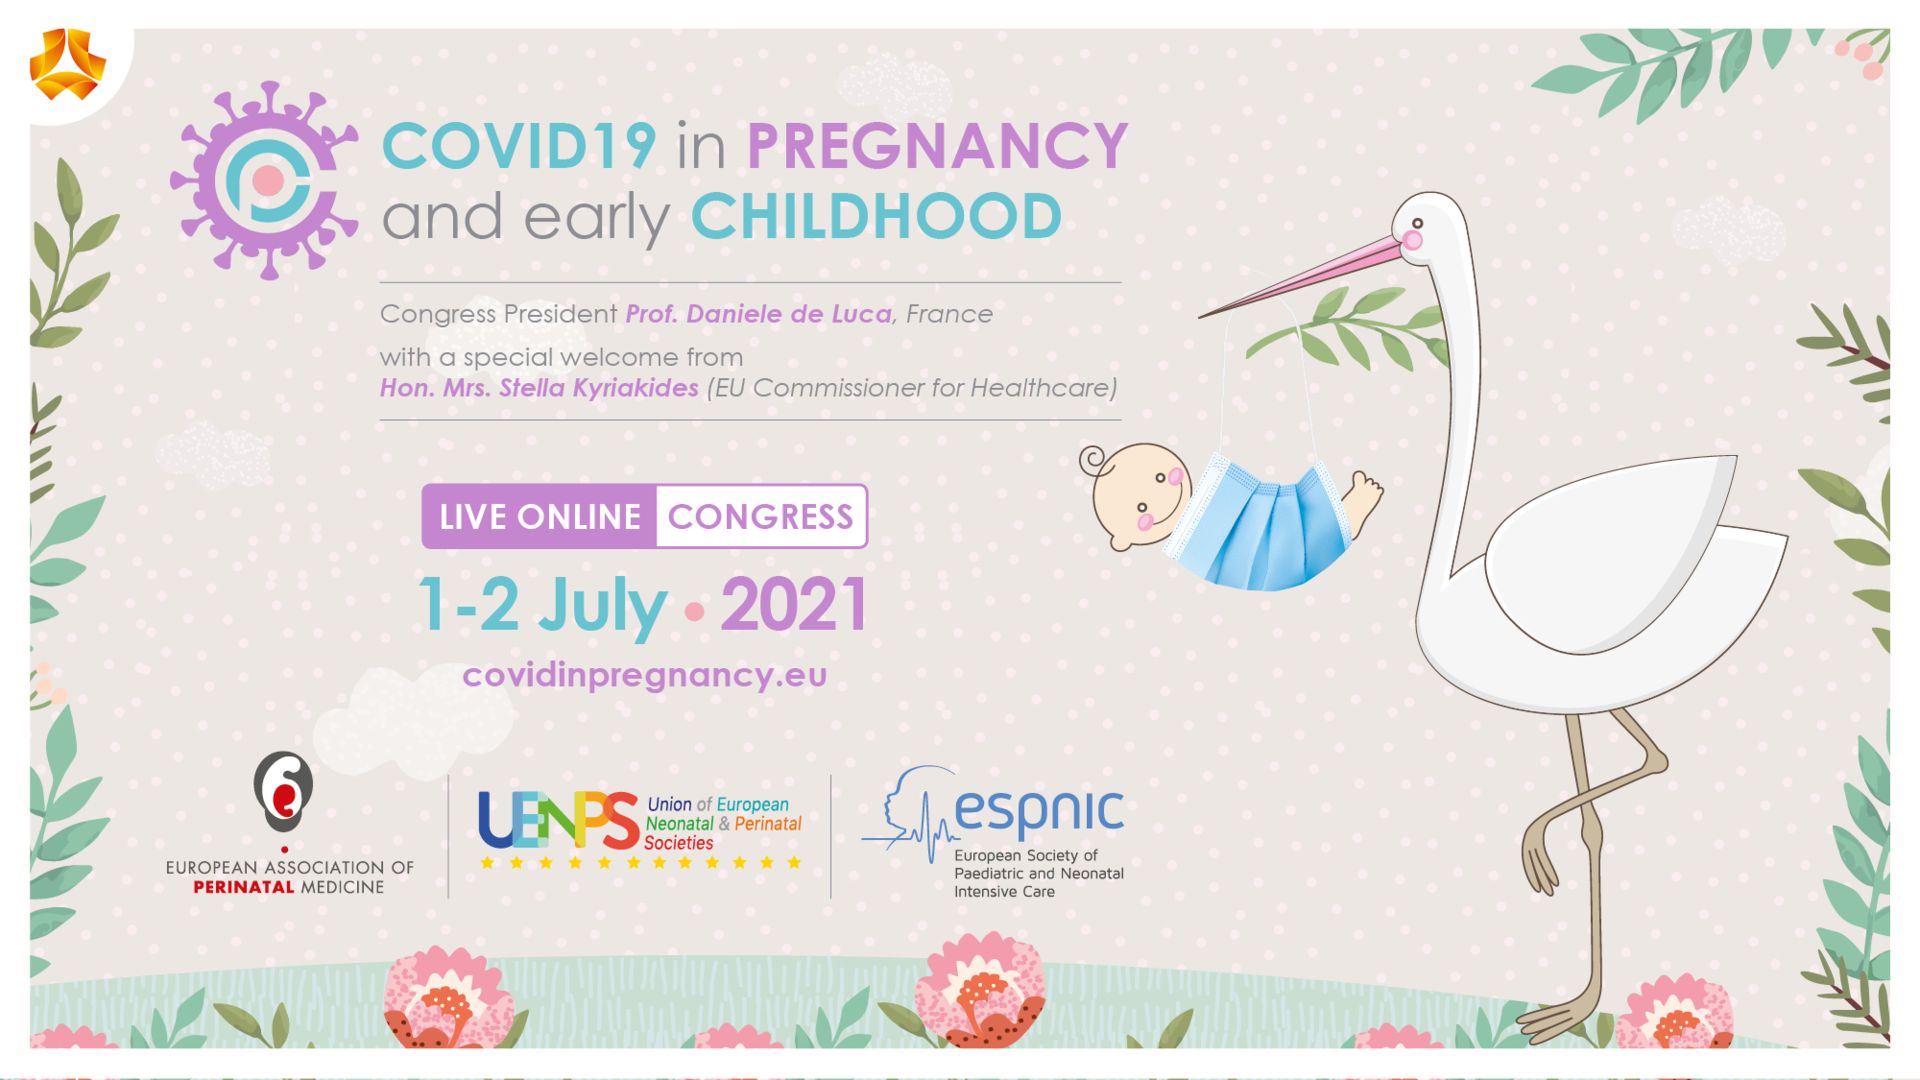 COVID19 in Pregnancy and Early Childhood - Live Online Congress, Online, Italy